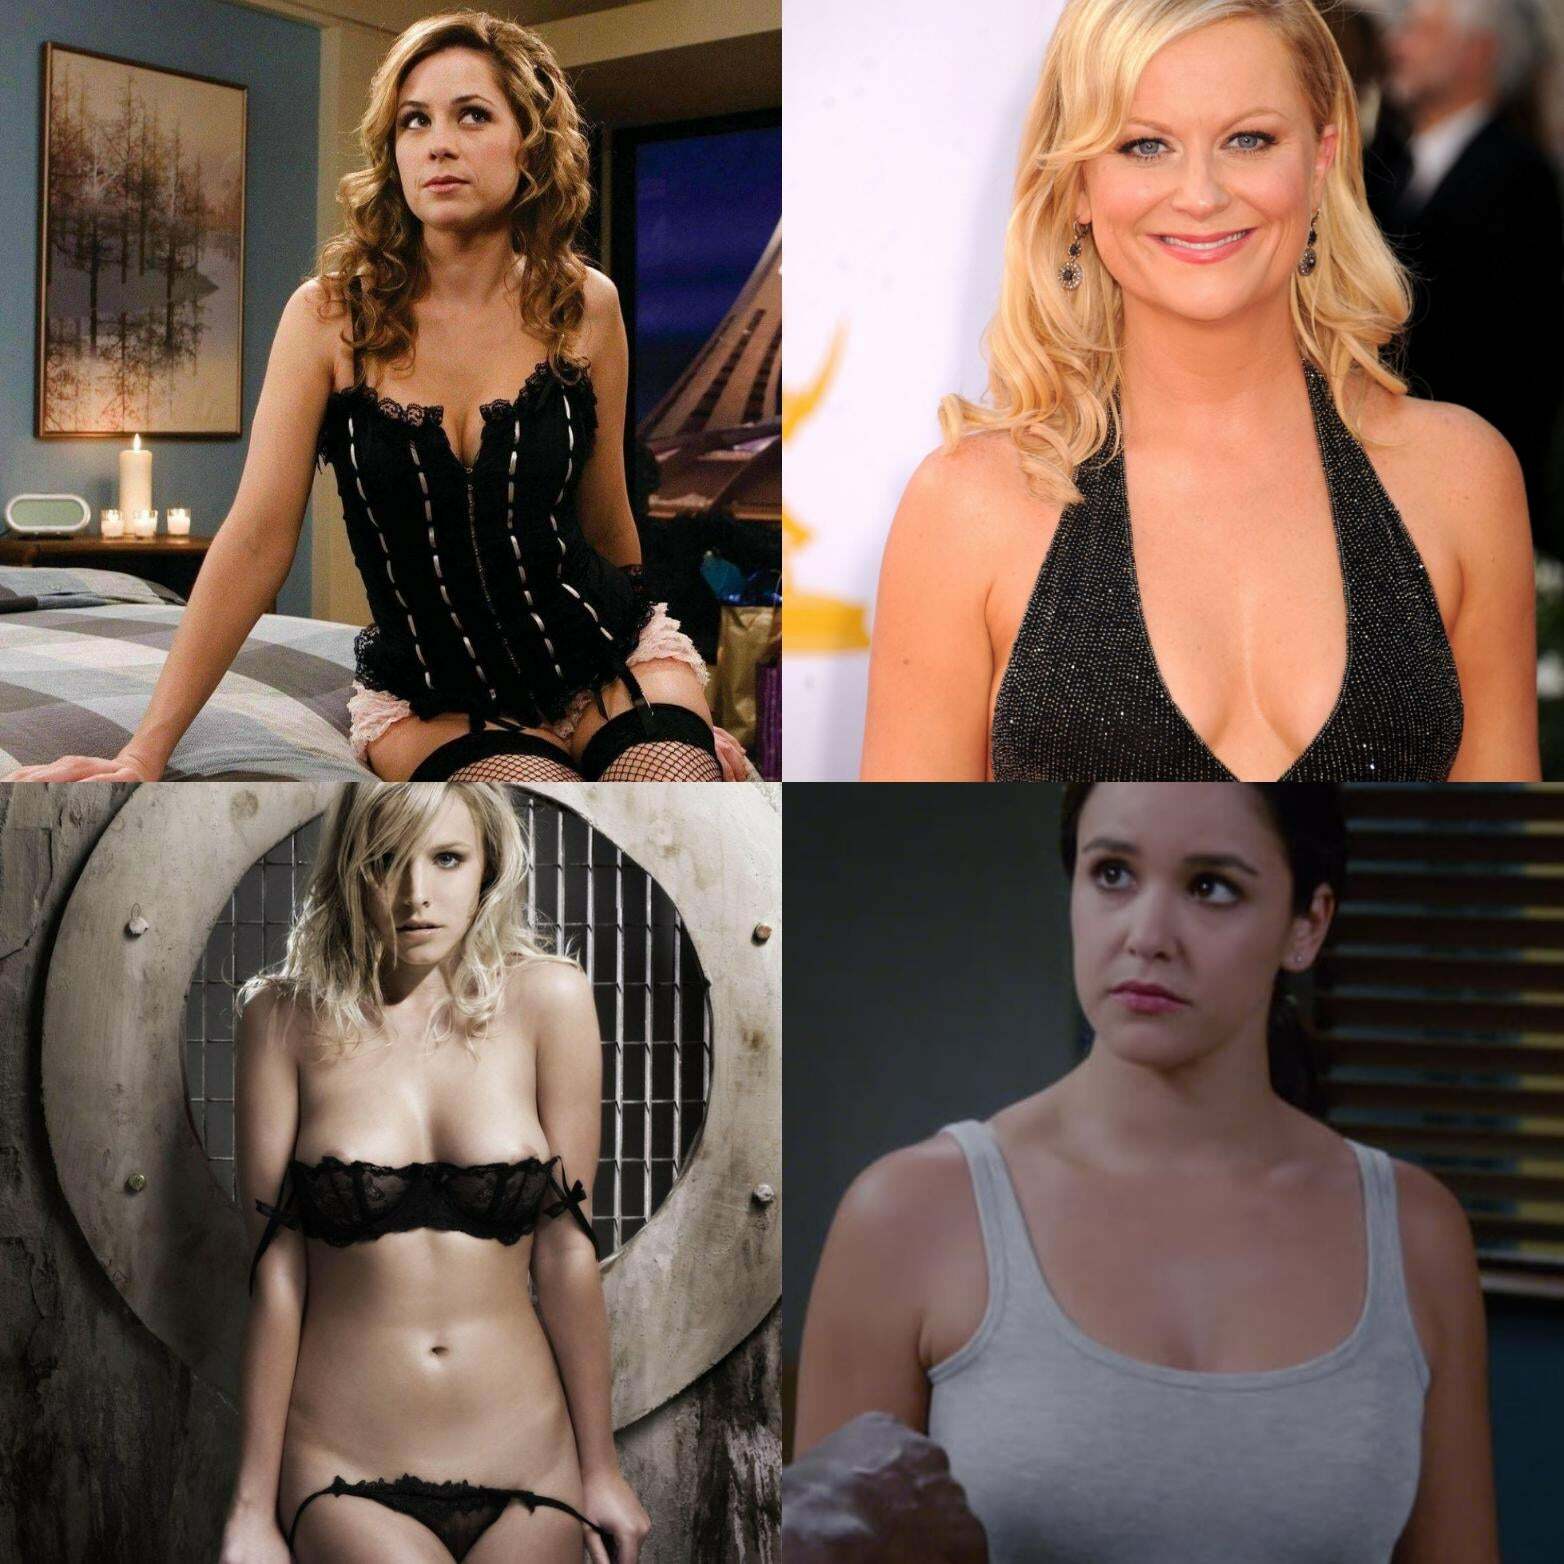 The good place nude